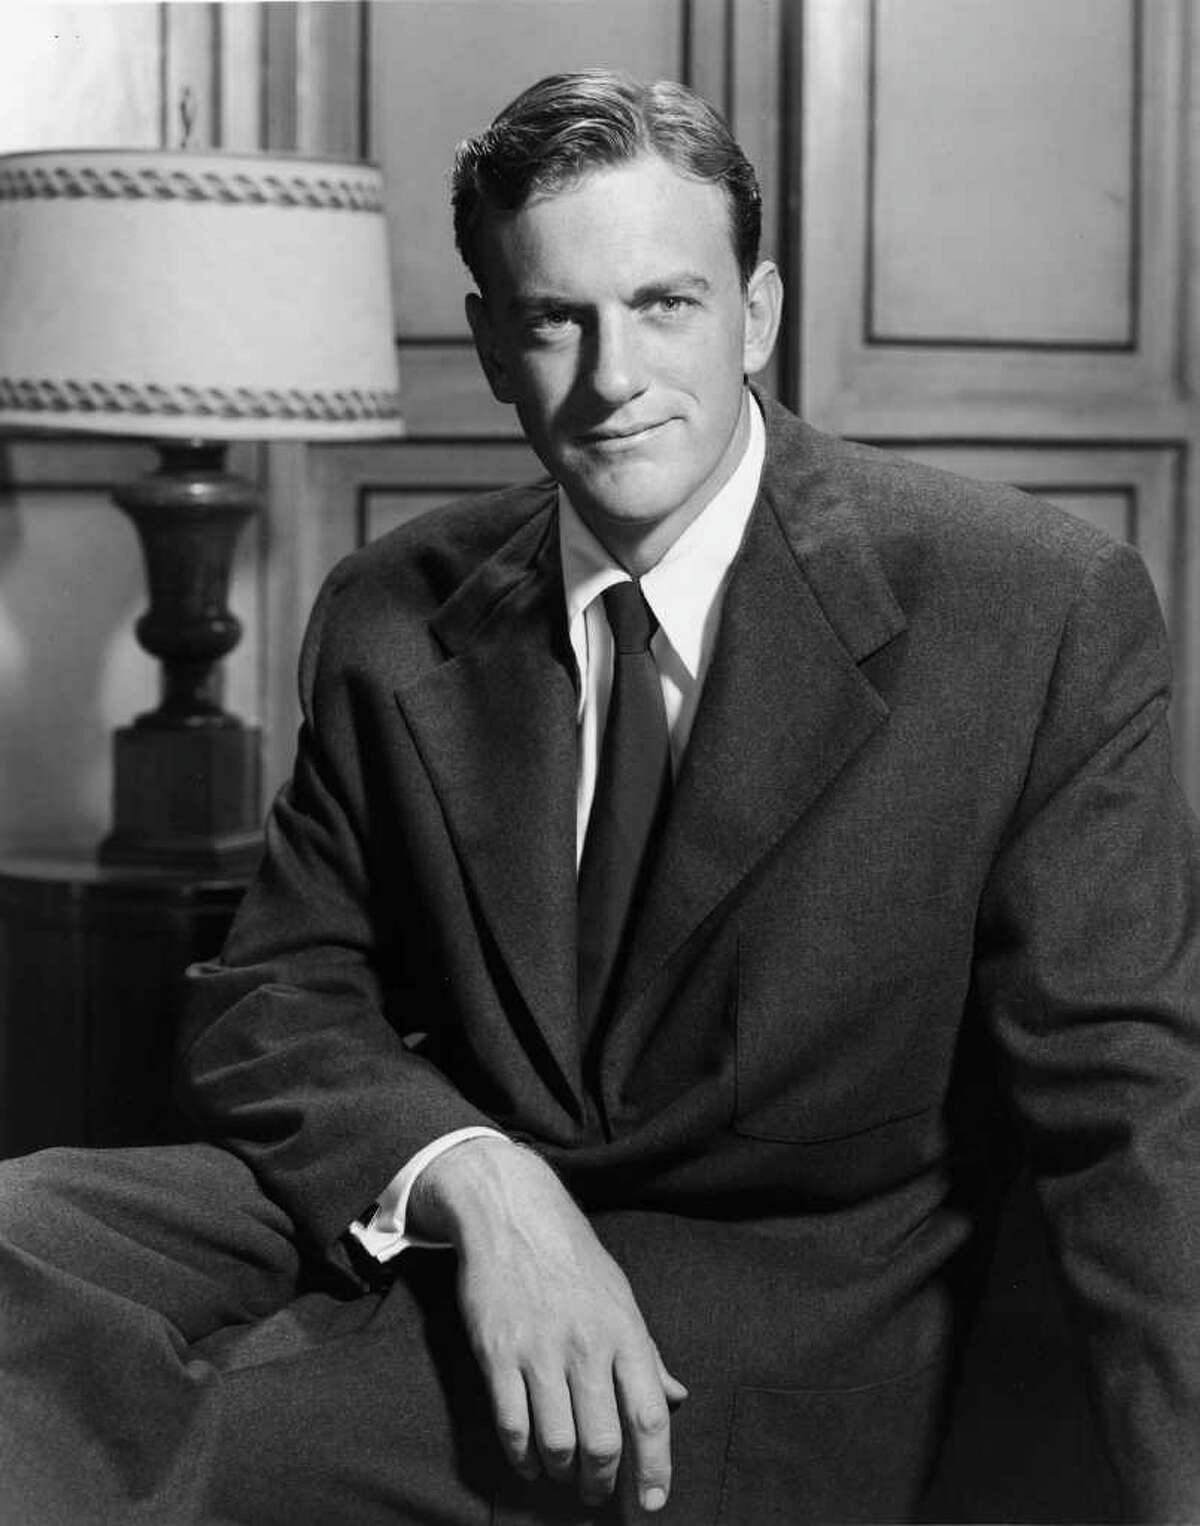 Promotional portrait of American actor James Arness, 1950s.